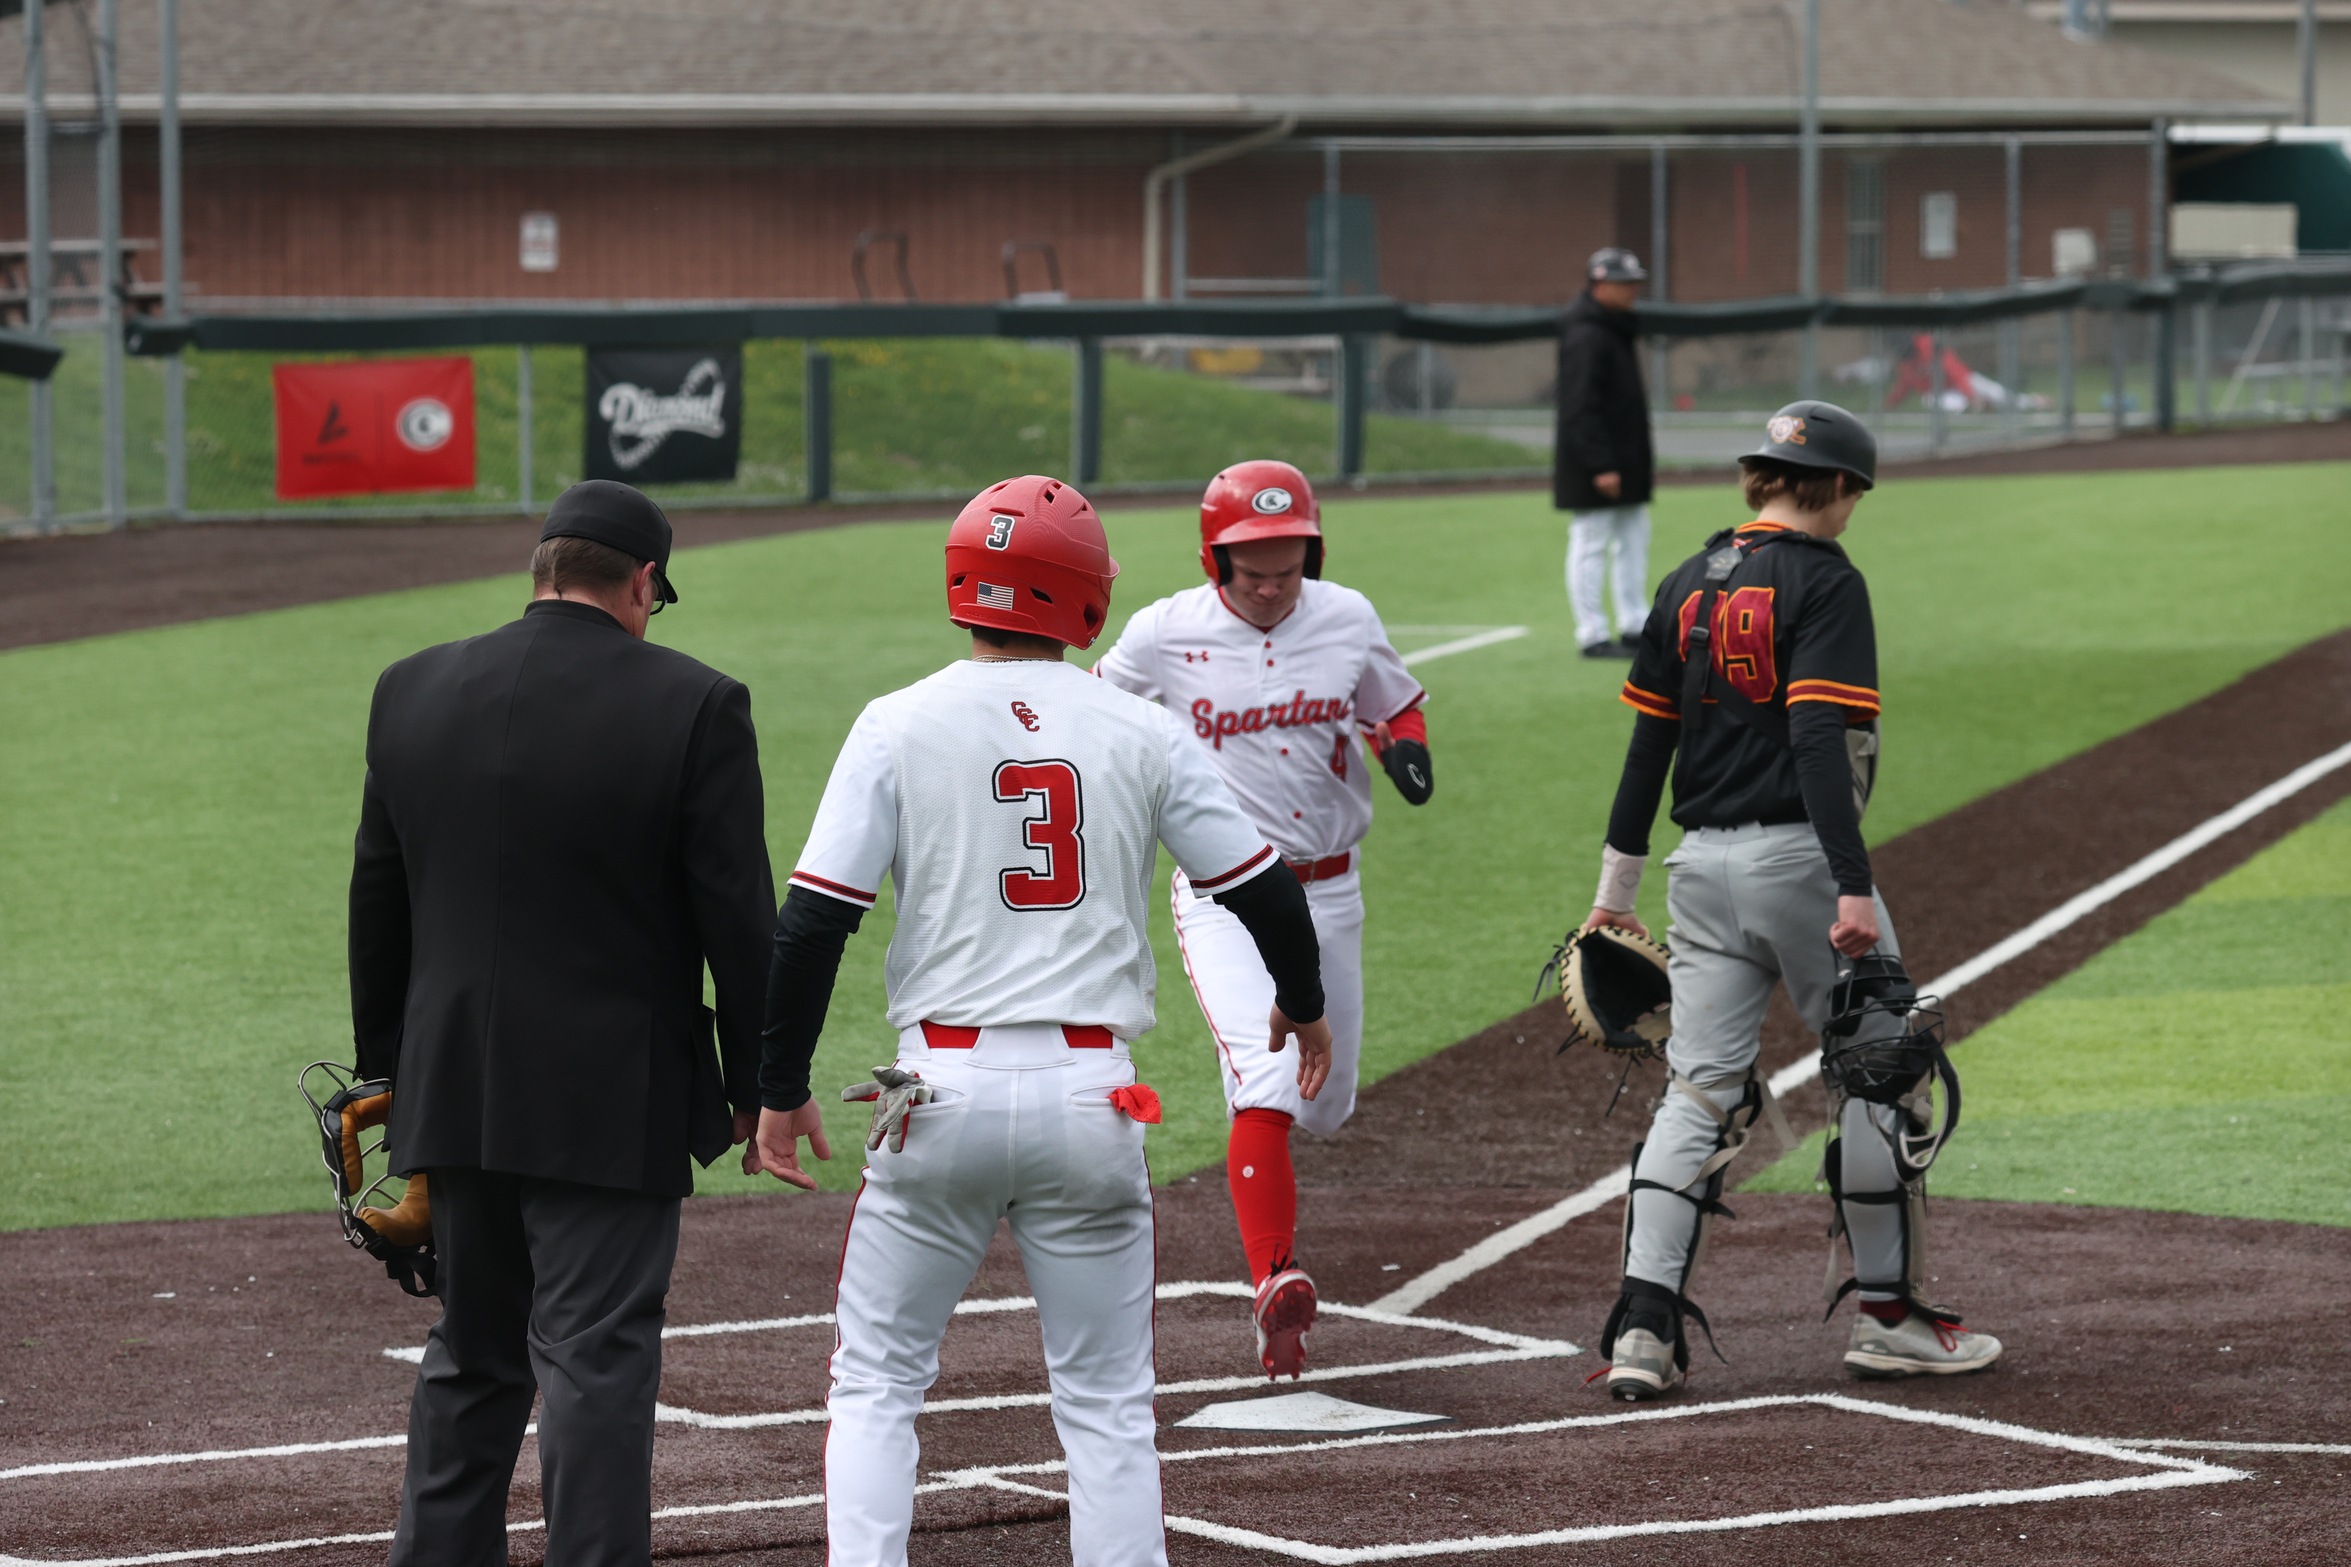 Owen Browne (4) hit his first homer of the season Thursday in a win over Jefferson CC.